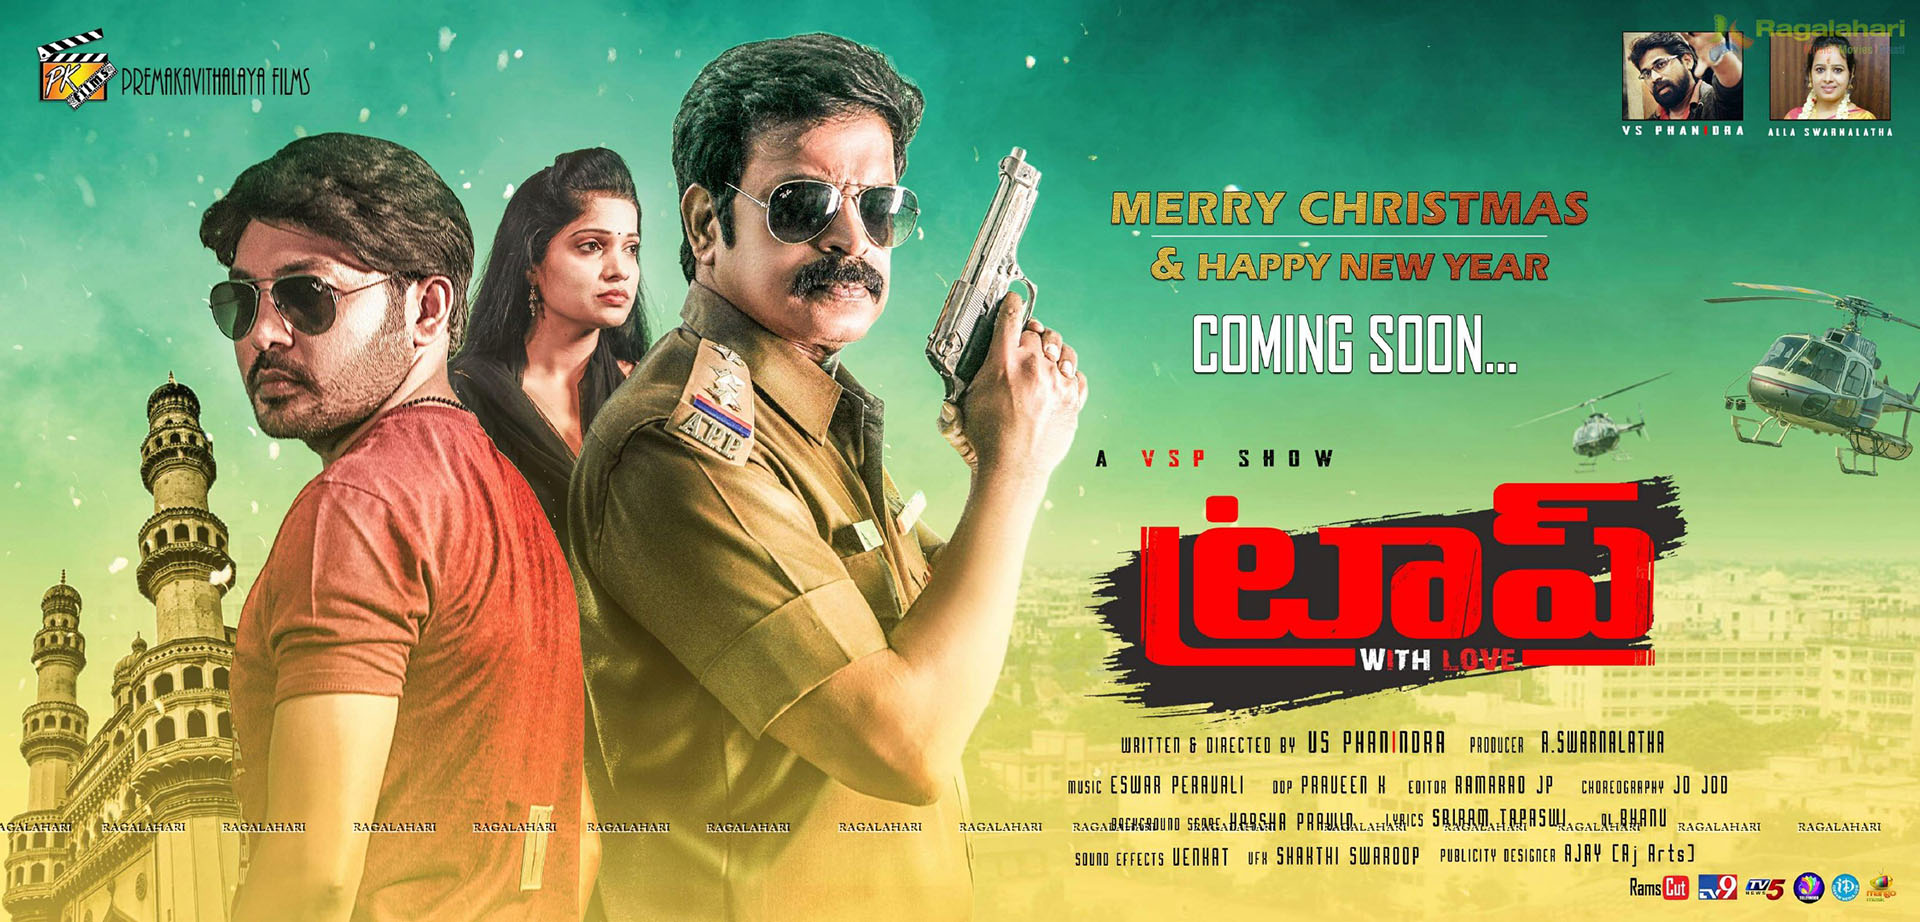 Trap Merry Christmas & New Year wishes Poster
